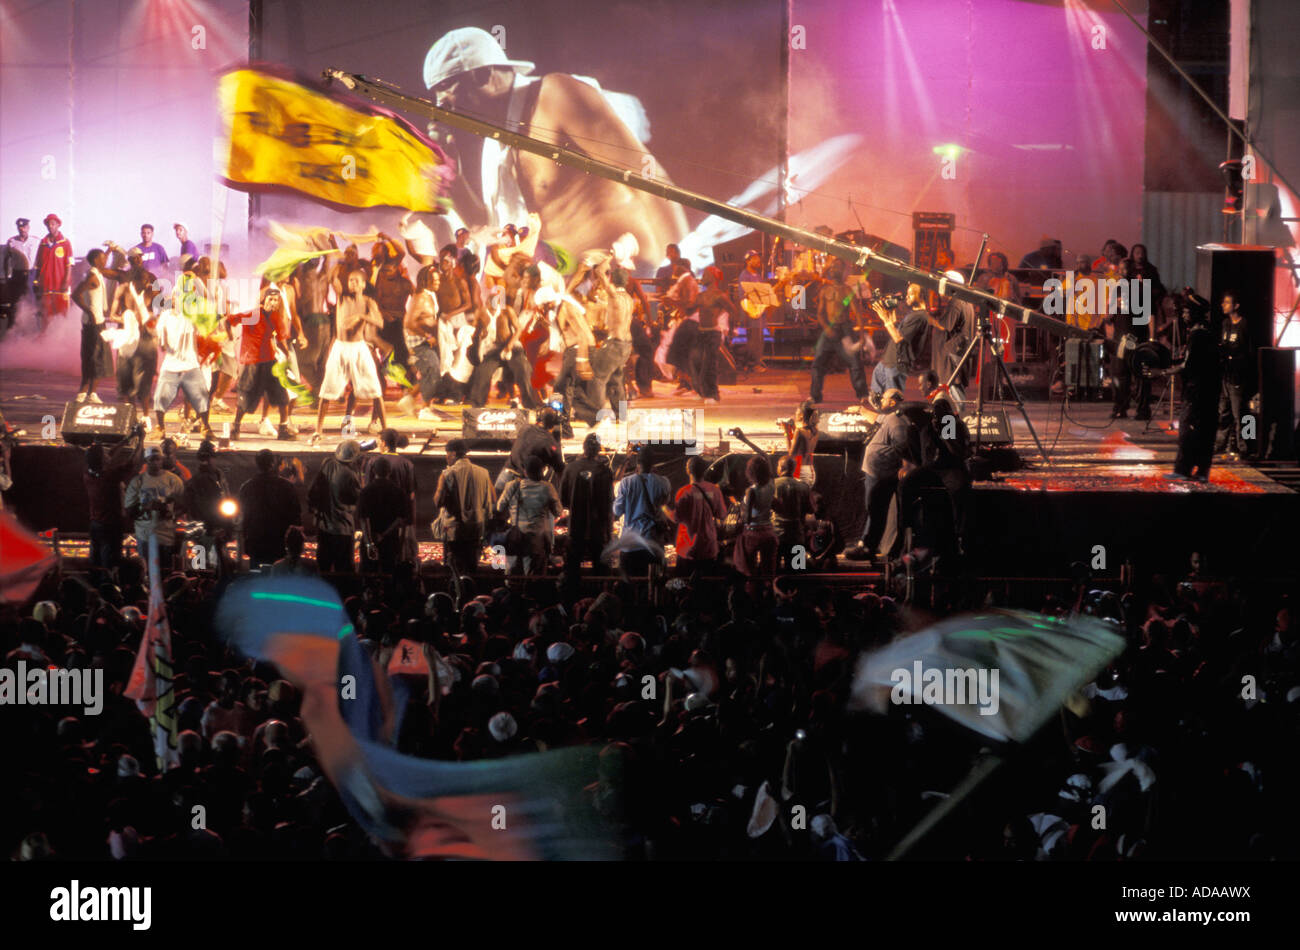 People performing on stage Soca Monarch Competion during Carnival Port of Spain Trinidad Trinidad And Tobago Stock Photo